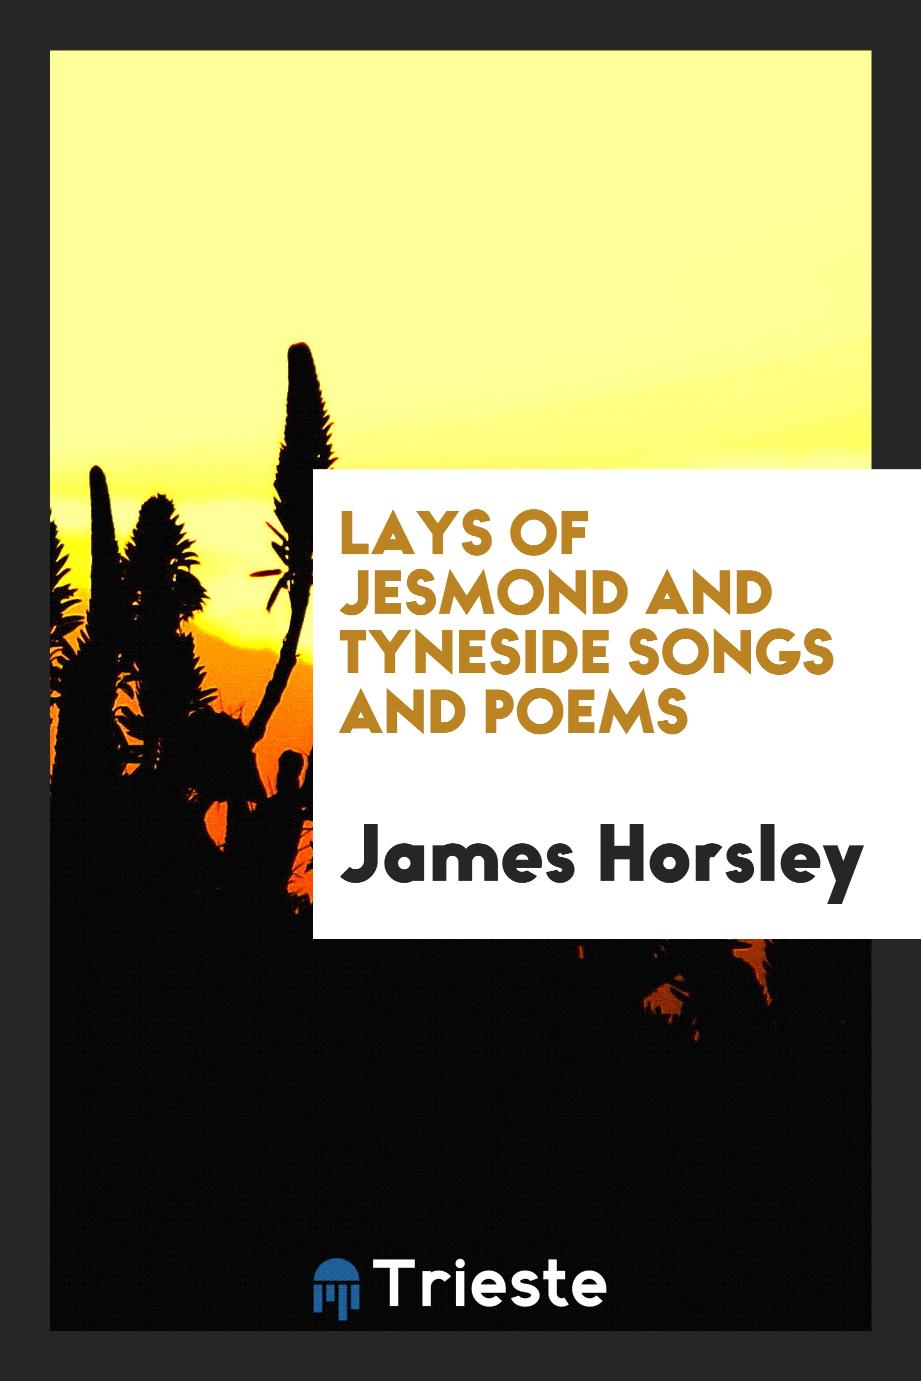 Lays of Jesmond and Tyneside songs and poems